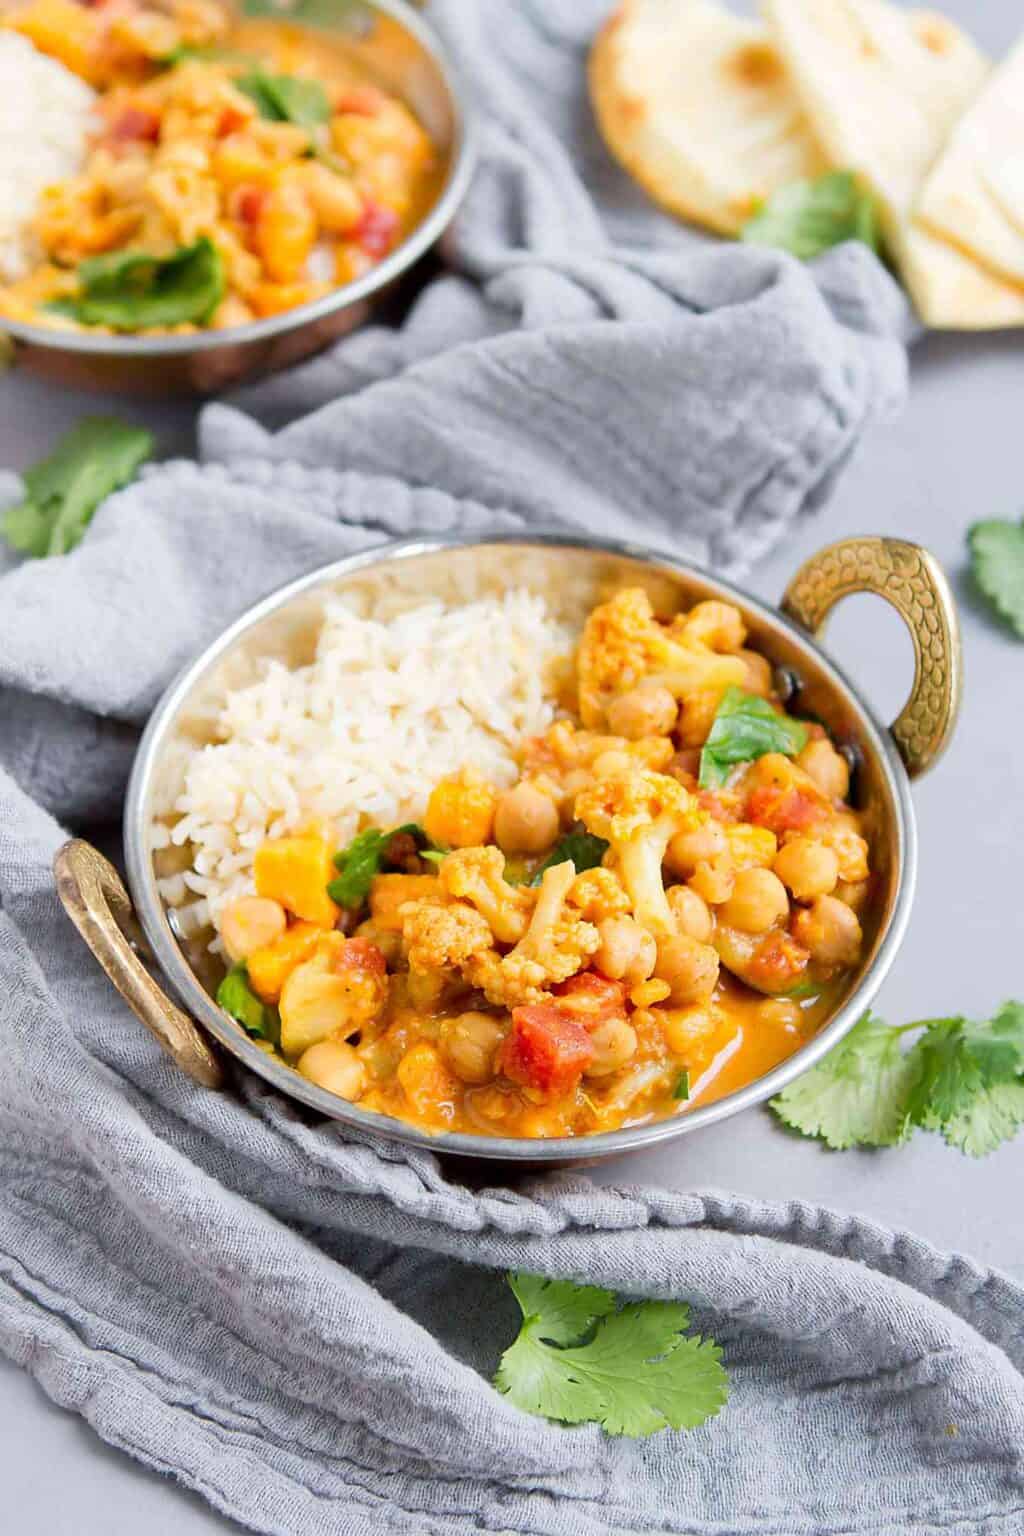 Chickpea curry and rice in brass bowls with handles, on gray napkin.